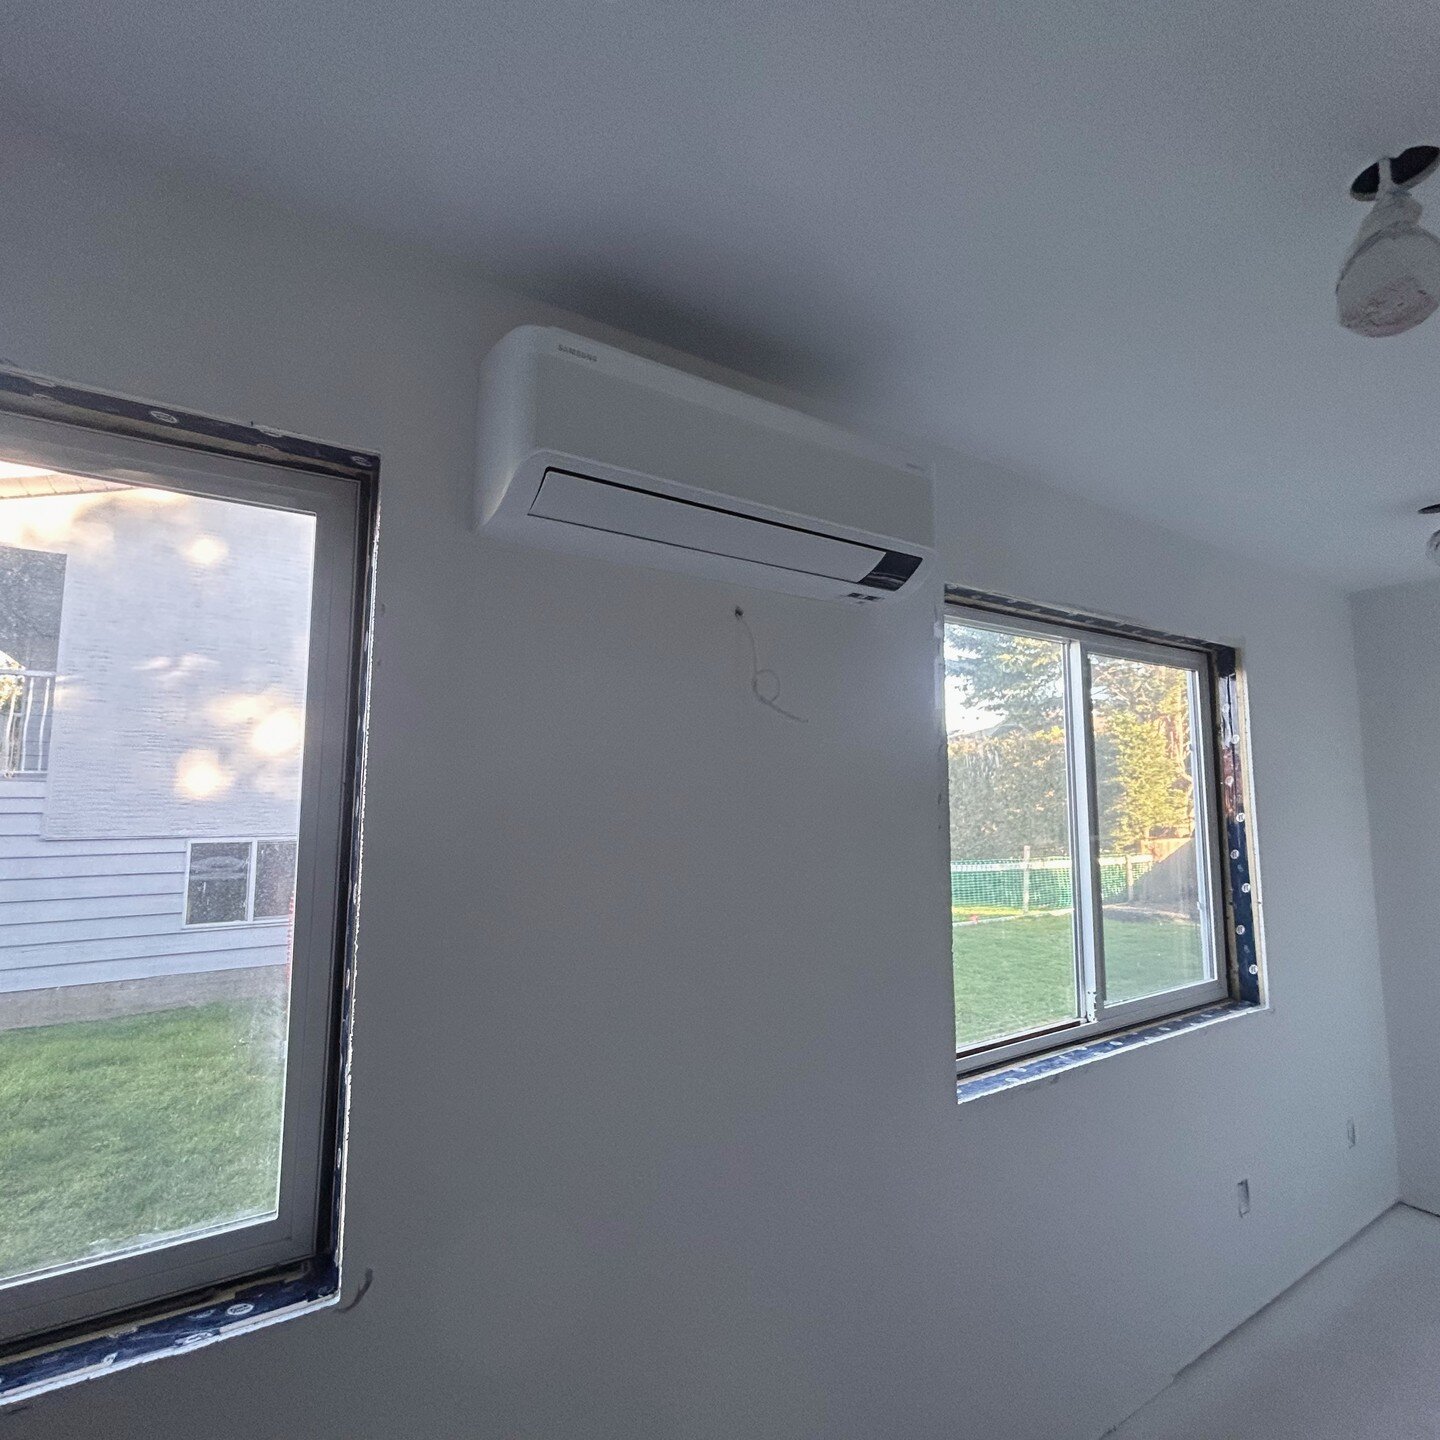 Our latest HVACR installation - a cutting-edge heat pump system by Samsung!

We're thrilled to showcase our recent project, featuring a 36k FJM outdoor unit paired with four wall-mounted head split systems. This state-of-the-art heat pump system is d